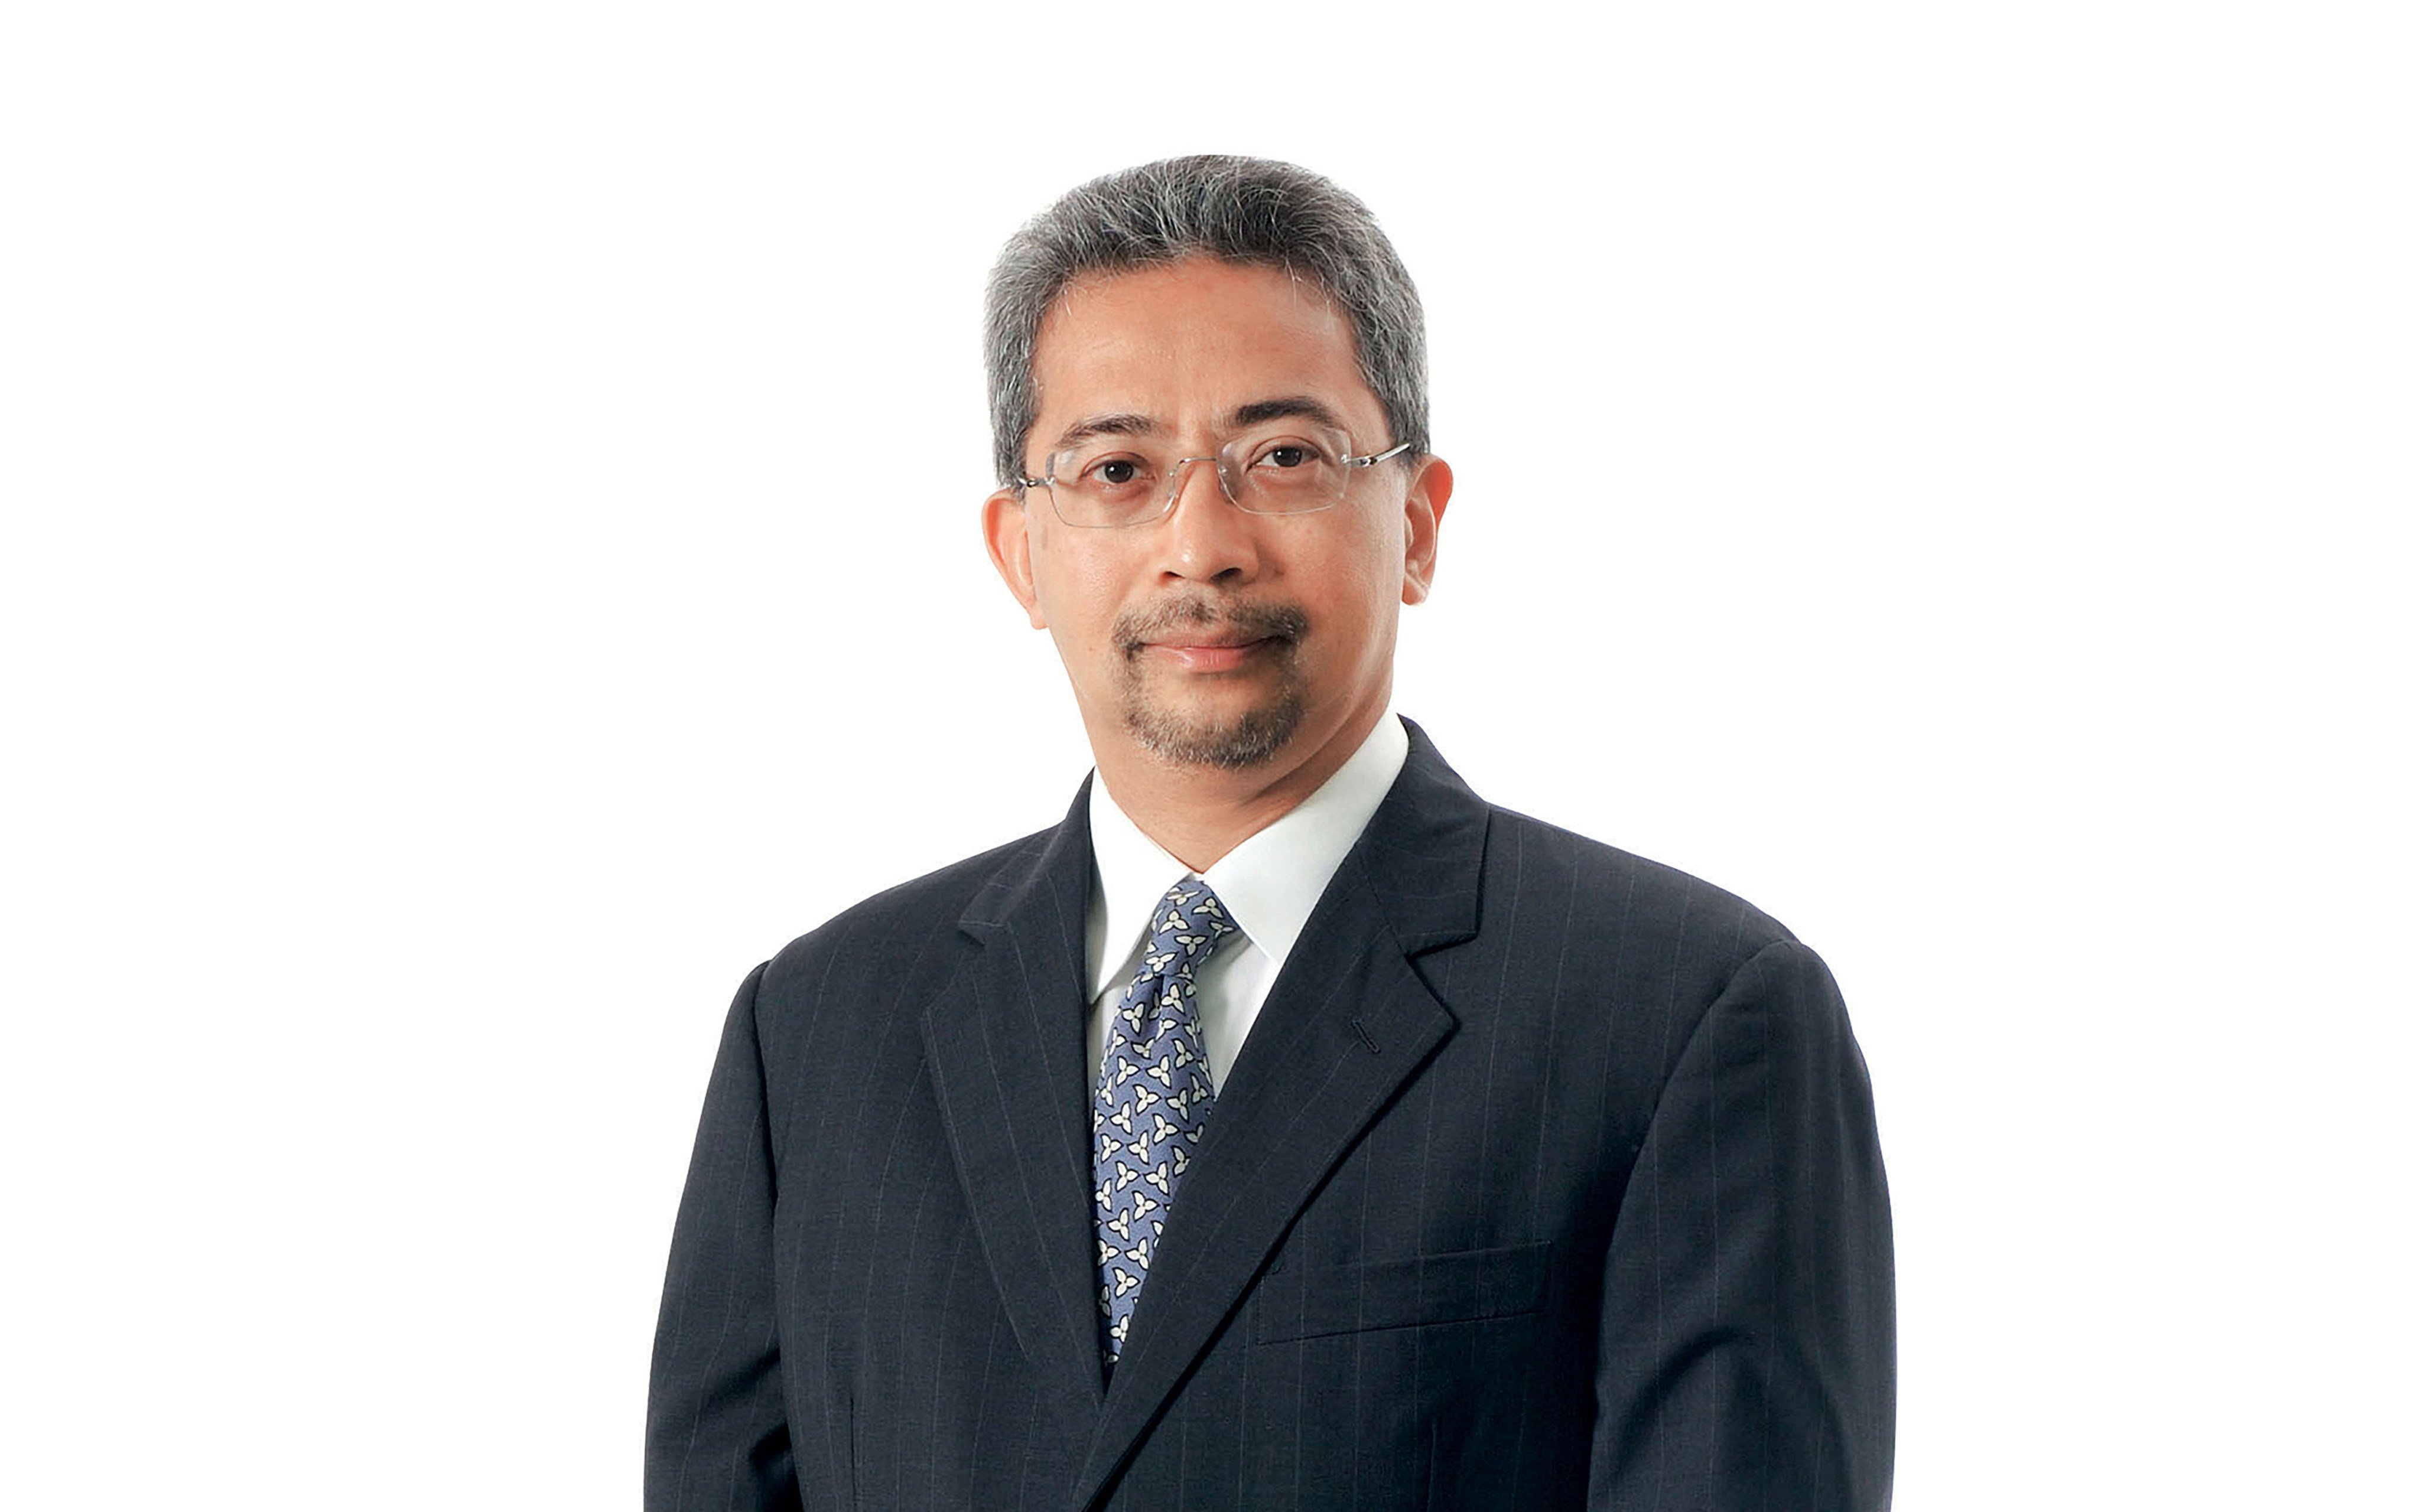 Mirzan Mahathir, the eldest son of former Malaysian prime minister Mahathir Mohamad, has been told to declare his assets to the Malaysian Anti-Corruption Commission. Photo: SCMPOST